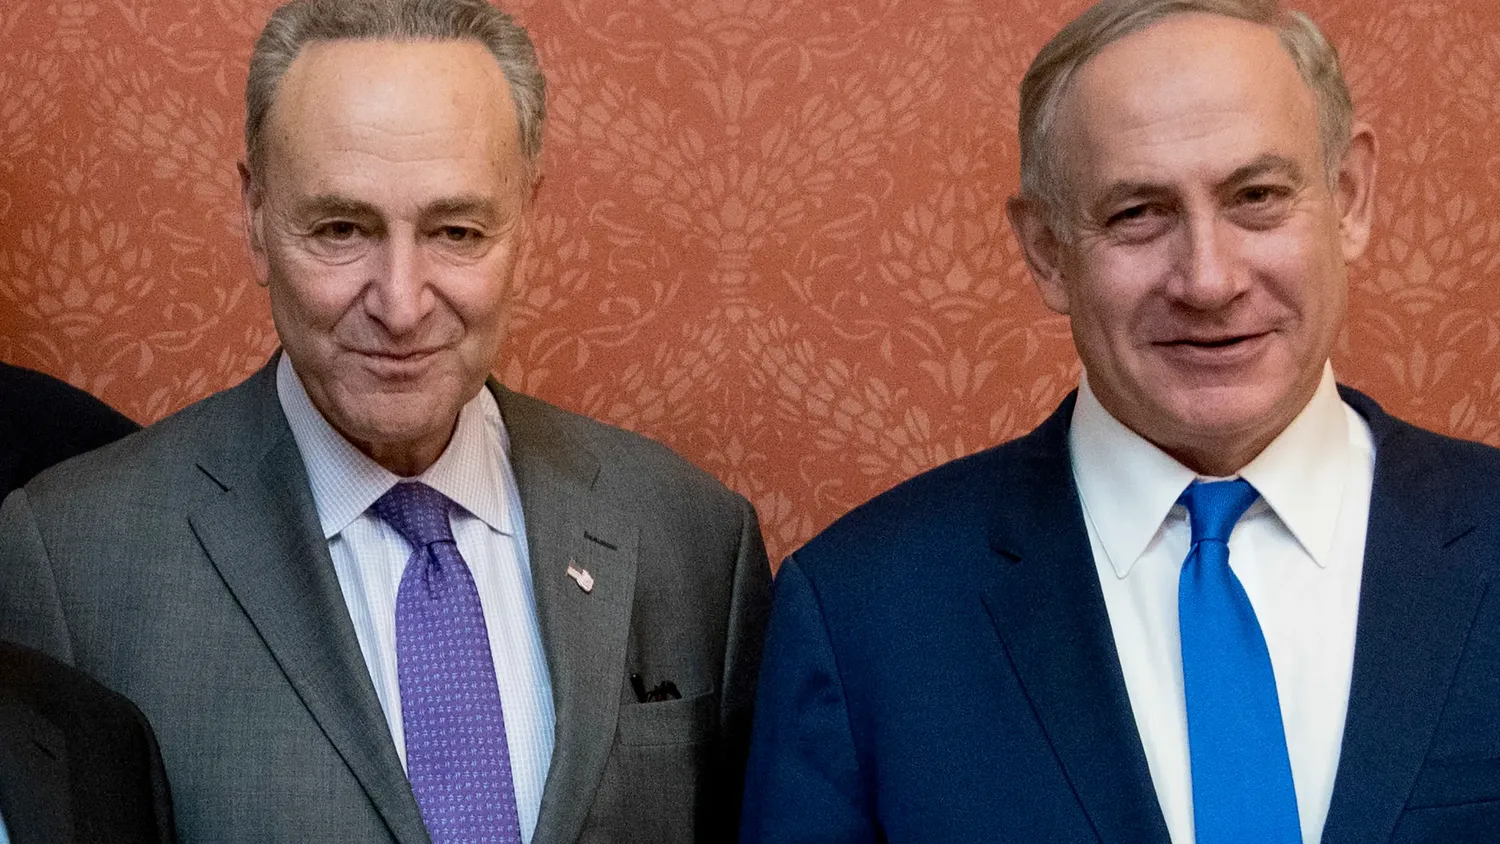 Israeli Prime Minister Benjamin Netanyahu, right, poses for a picture with Senate Minority Leader Chuck Schumer of New York, on Capitol Hill in Washington, Feb. 15, 2017